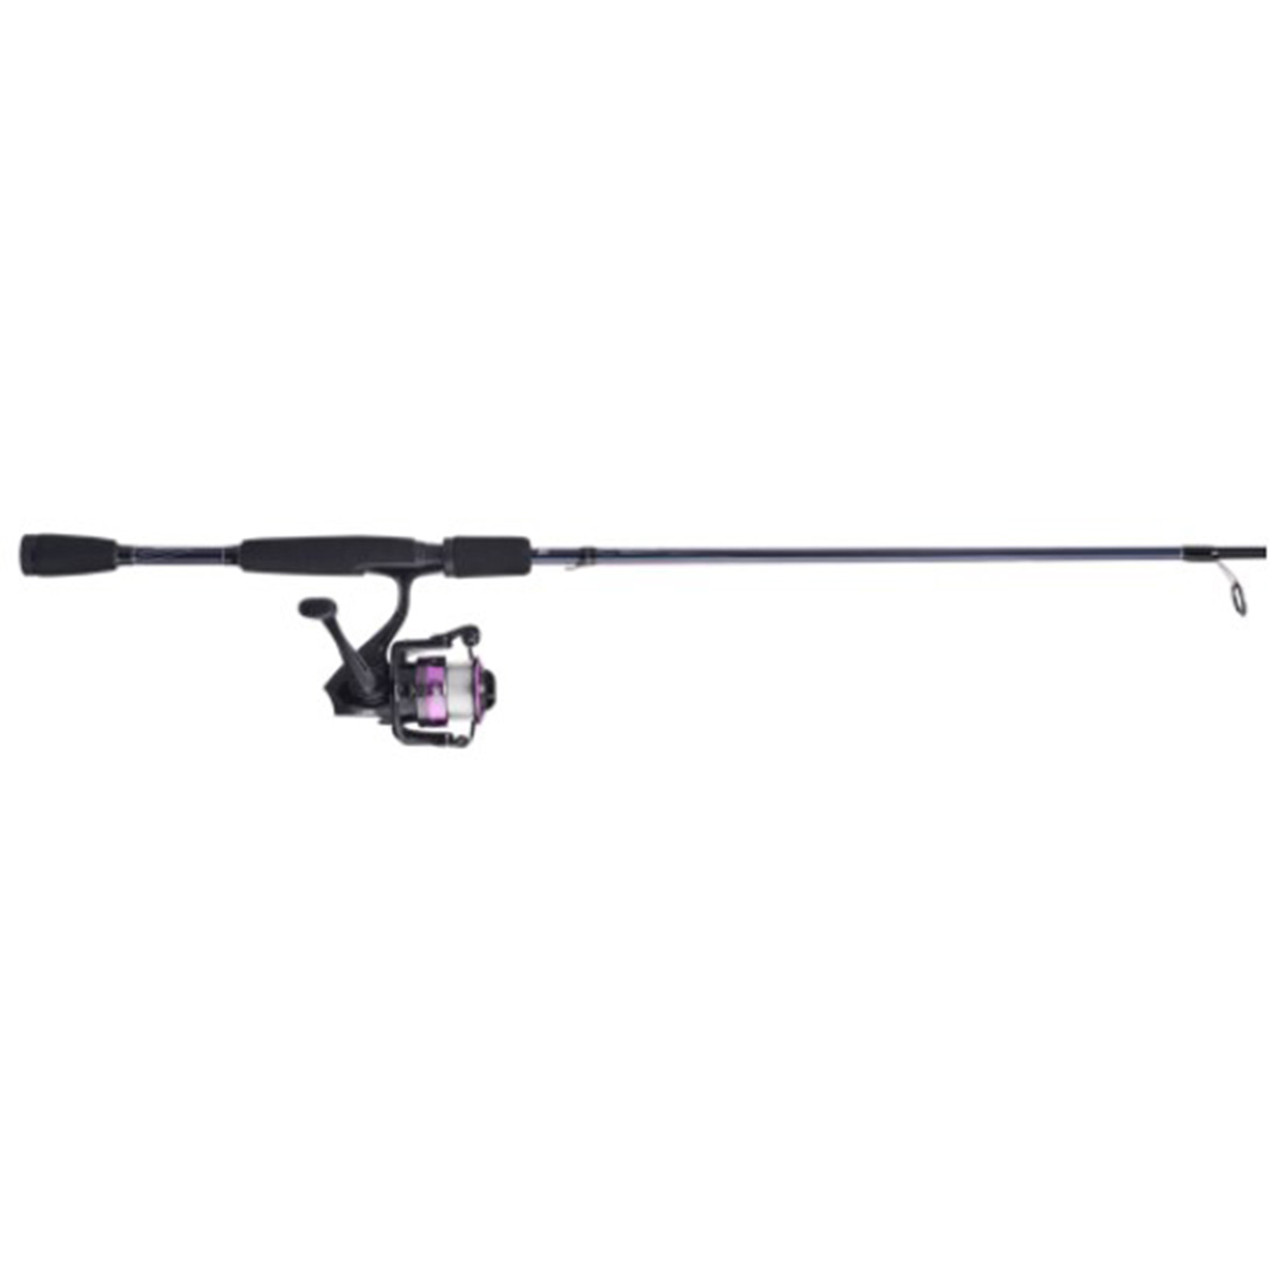 Gen Ike Spinning Rod and Reel Combo